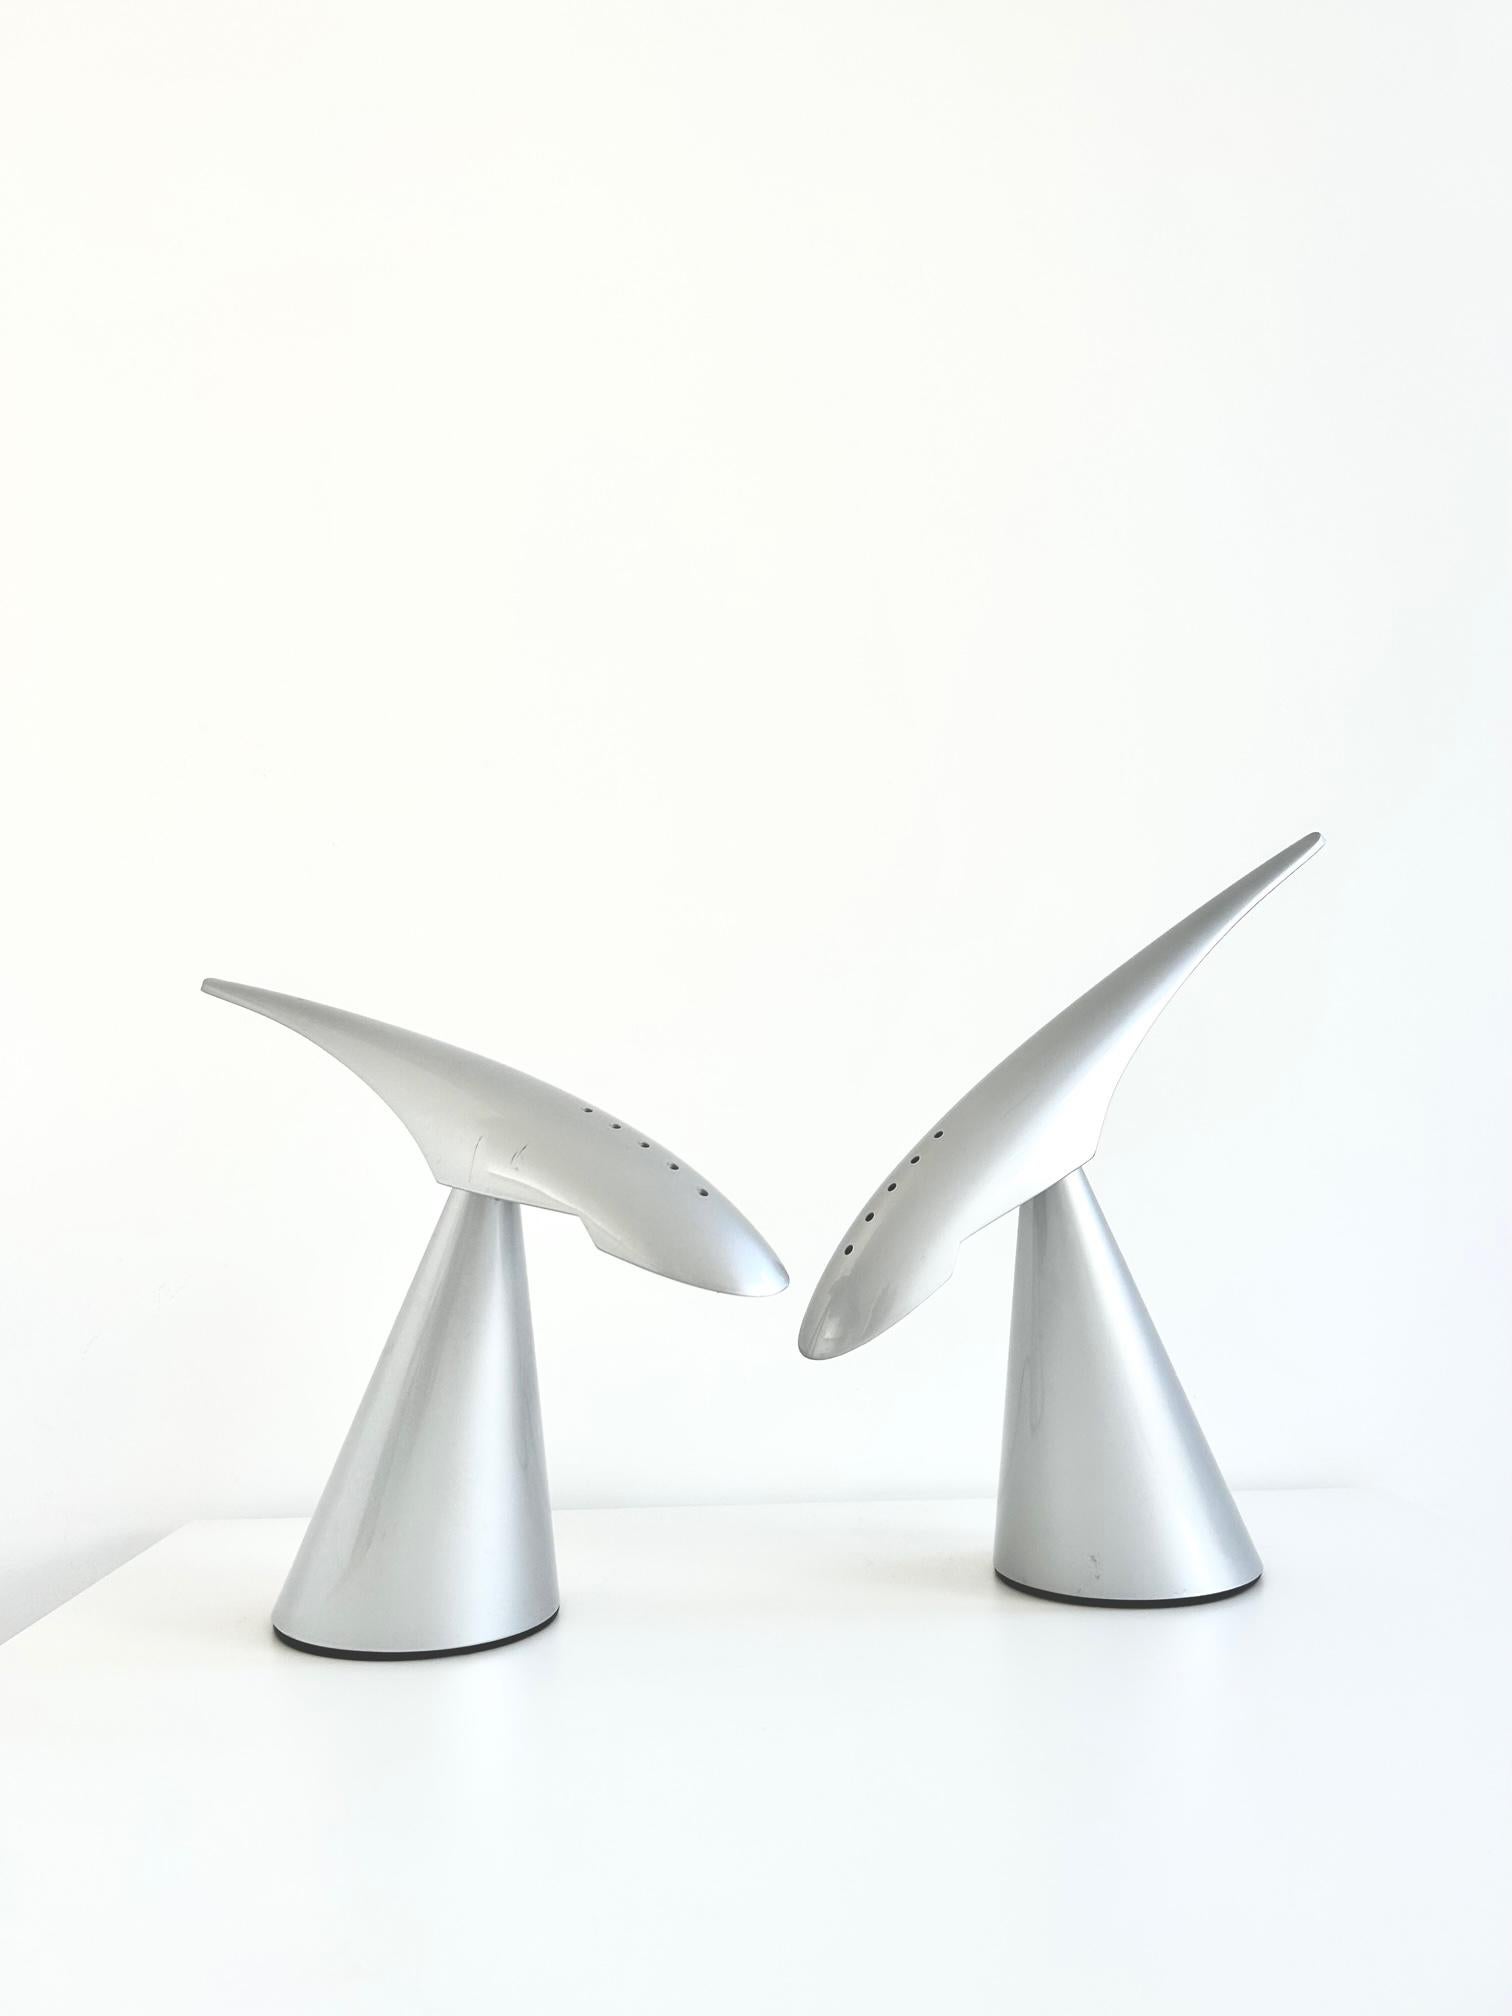 Pair of Ran Desk Lamps, Peter Naumann, ClassiCon, 1990s For Sale 4